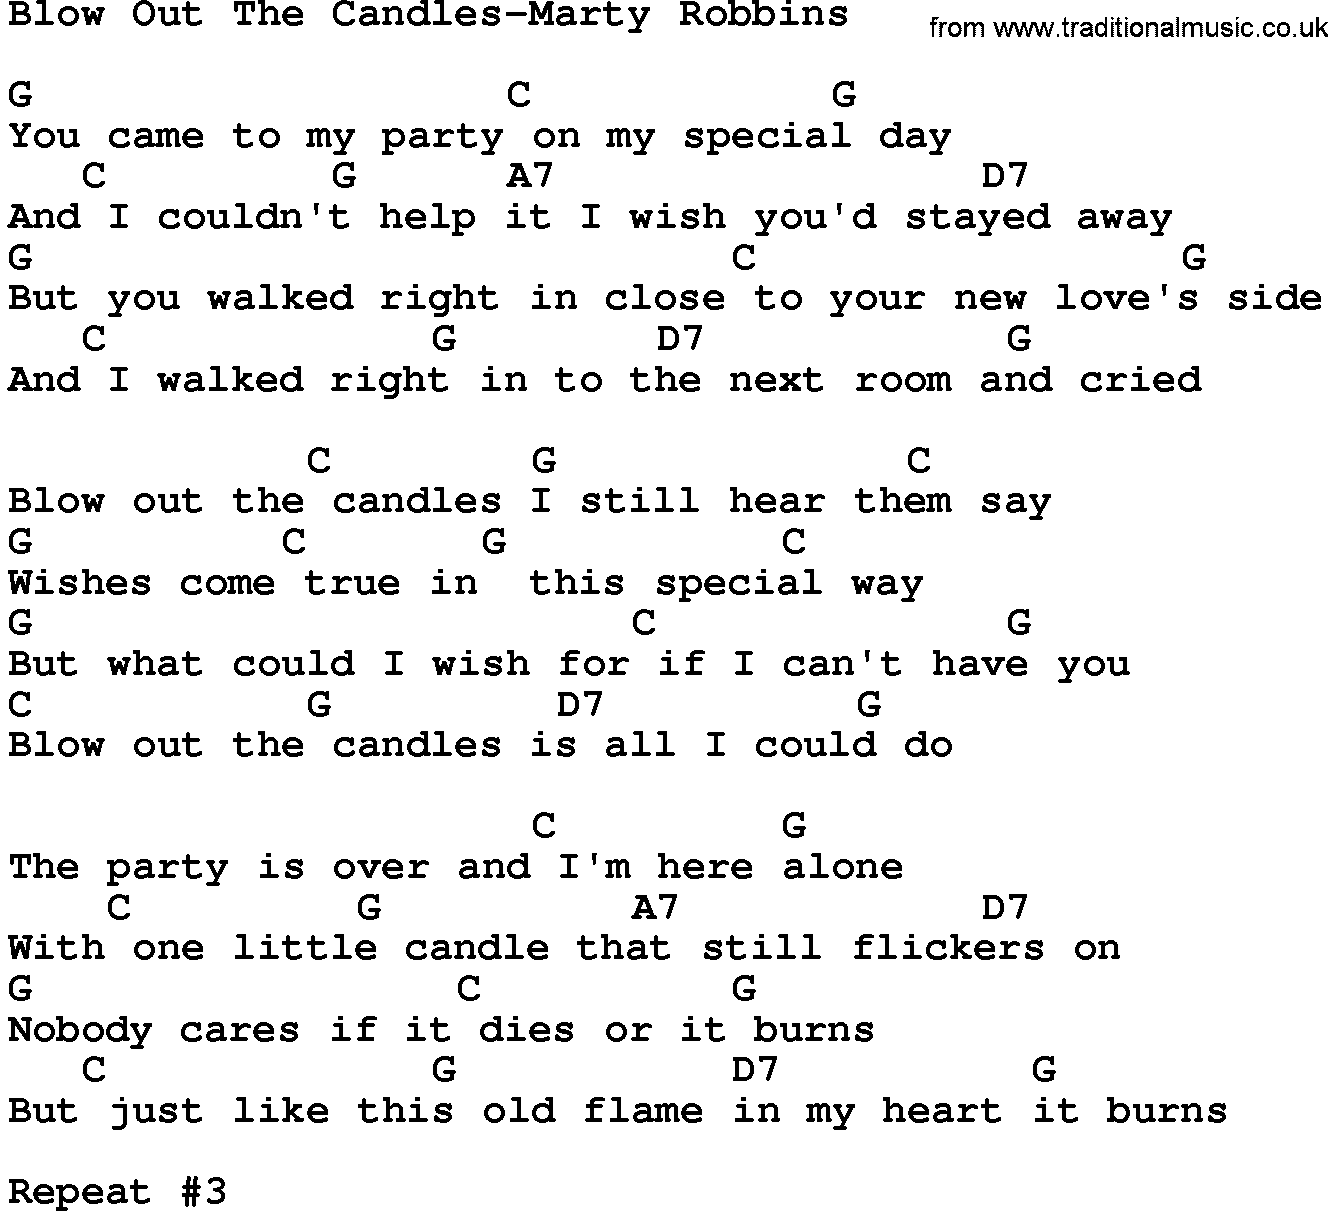 Country music song: Blow Out The Candles-Marty Robbins lyrics and chords